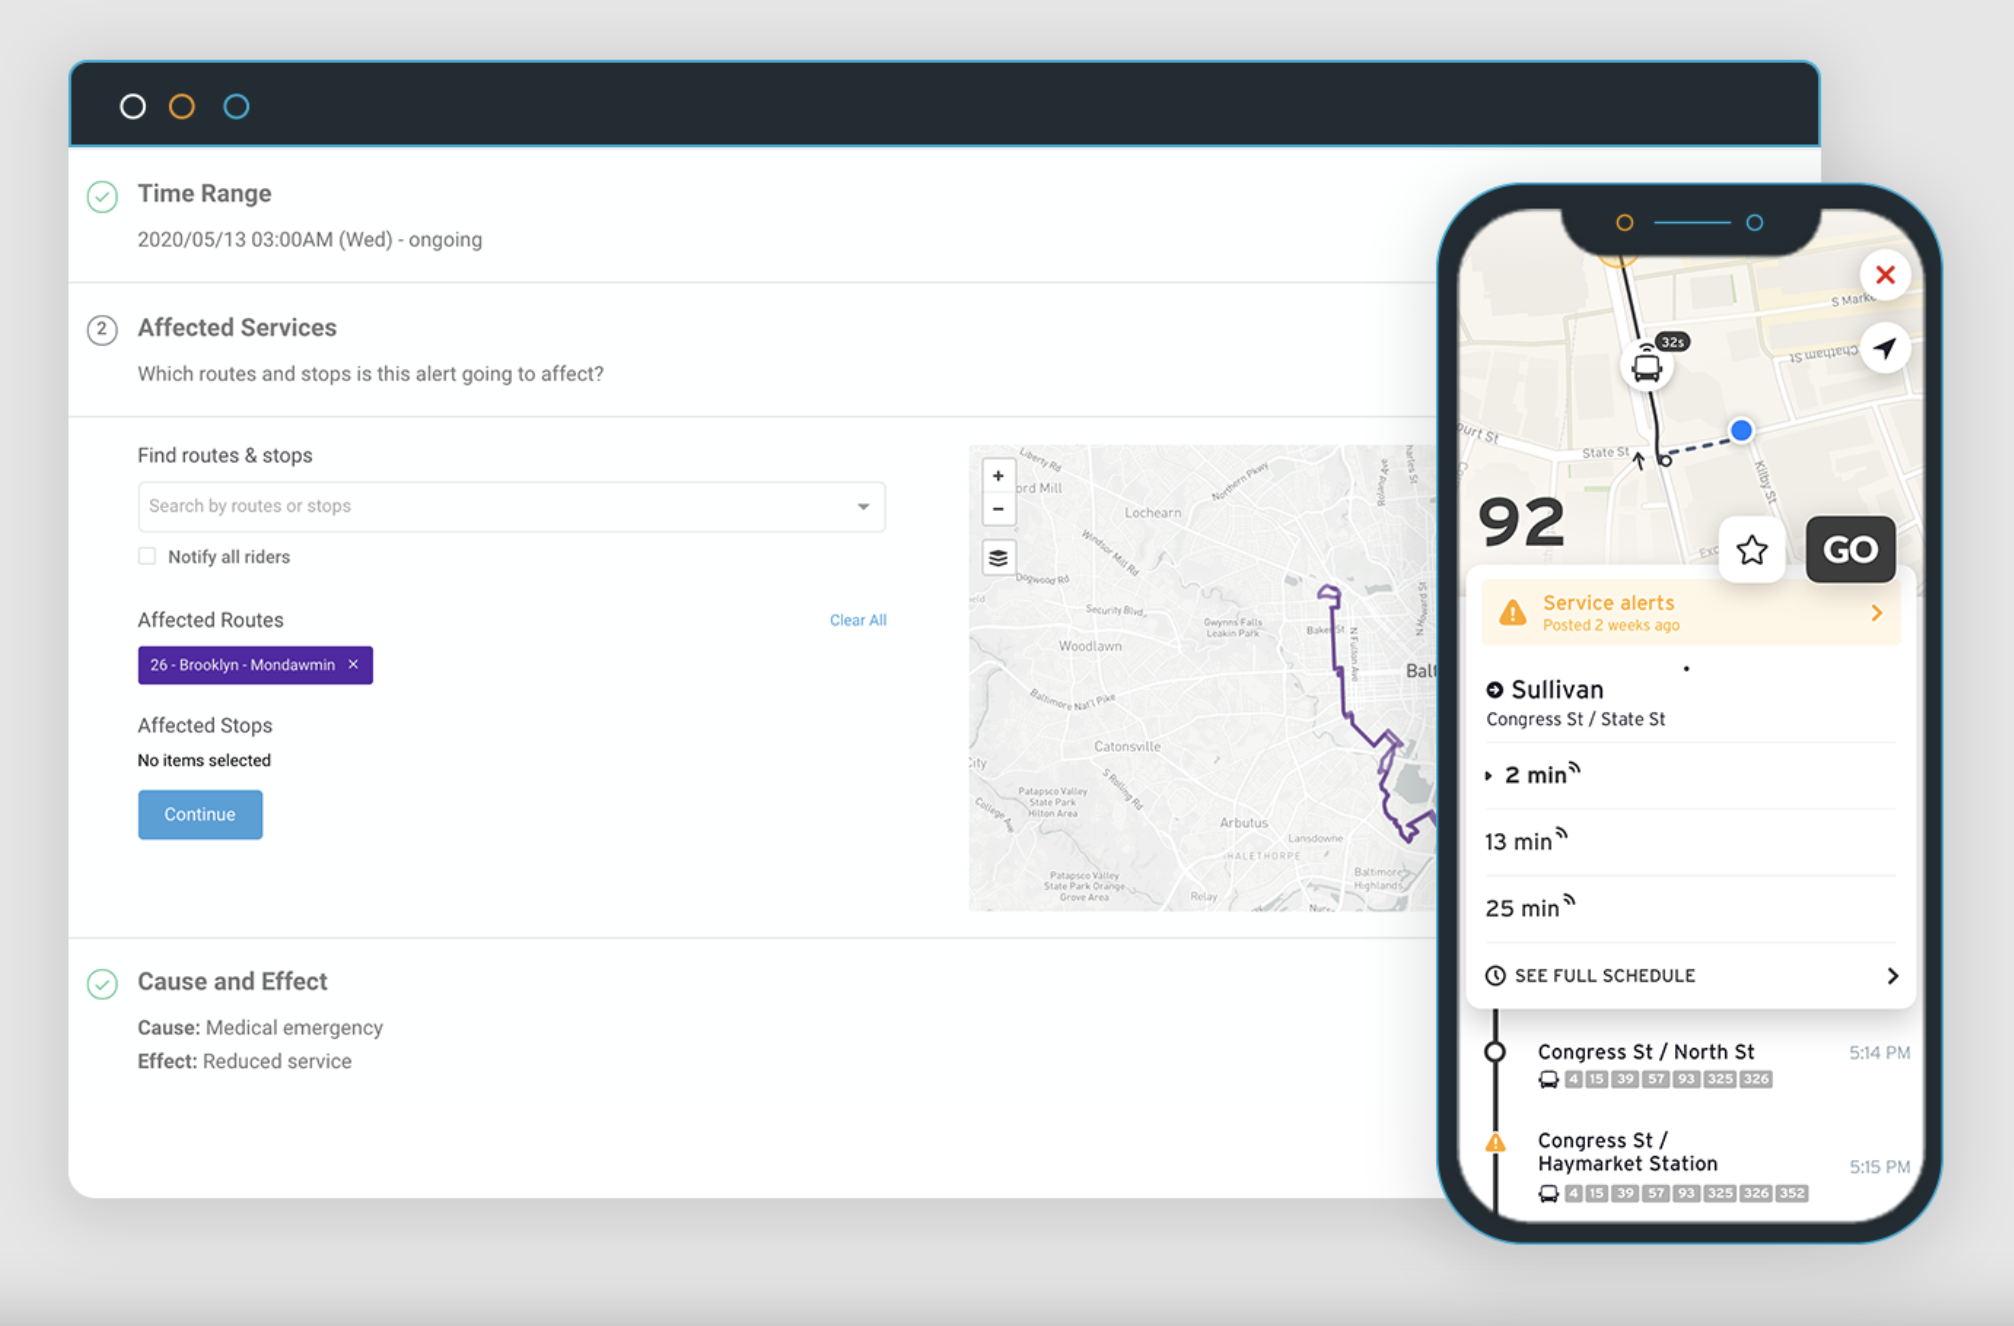 Rider Alerts enables agencies to seamlessly publish timely and accurate information across multiple platforms for passengers about changes to service, such as stop adjustments, detours, and delays.